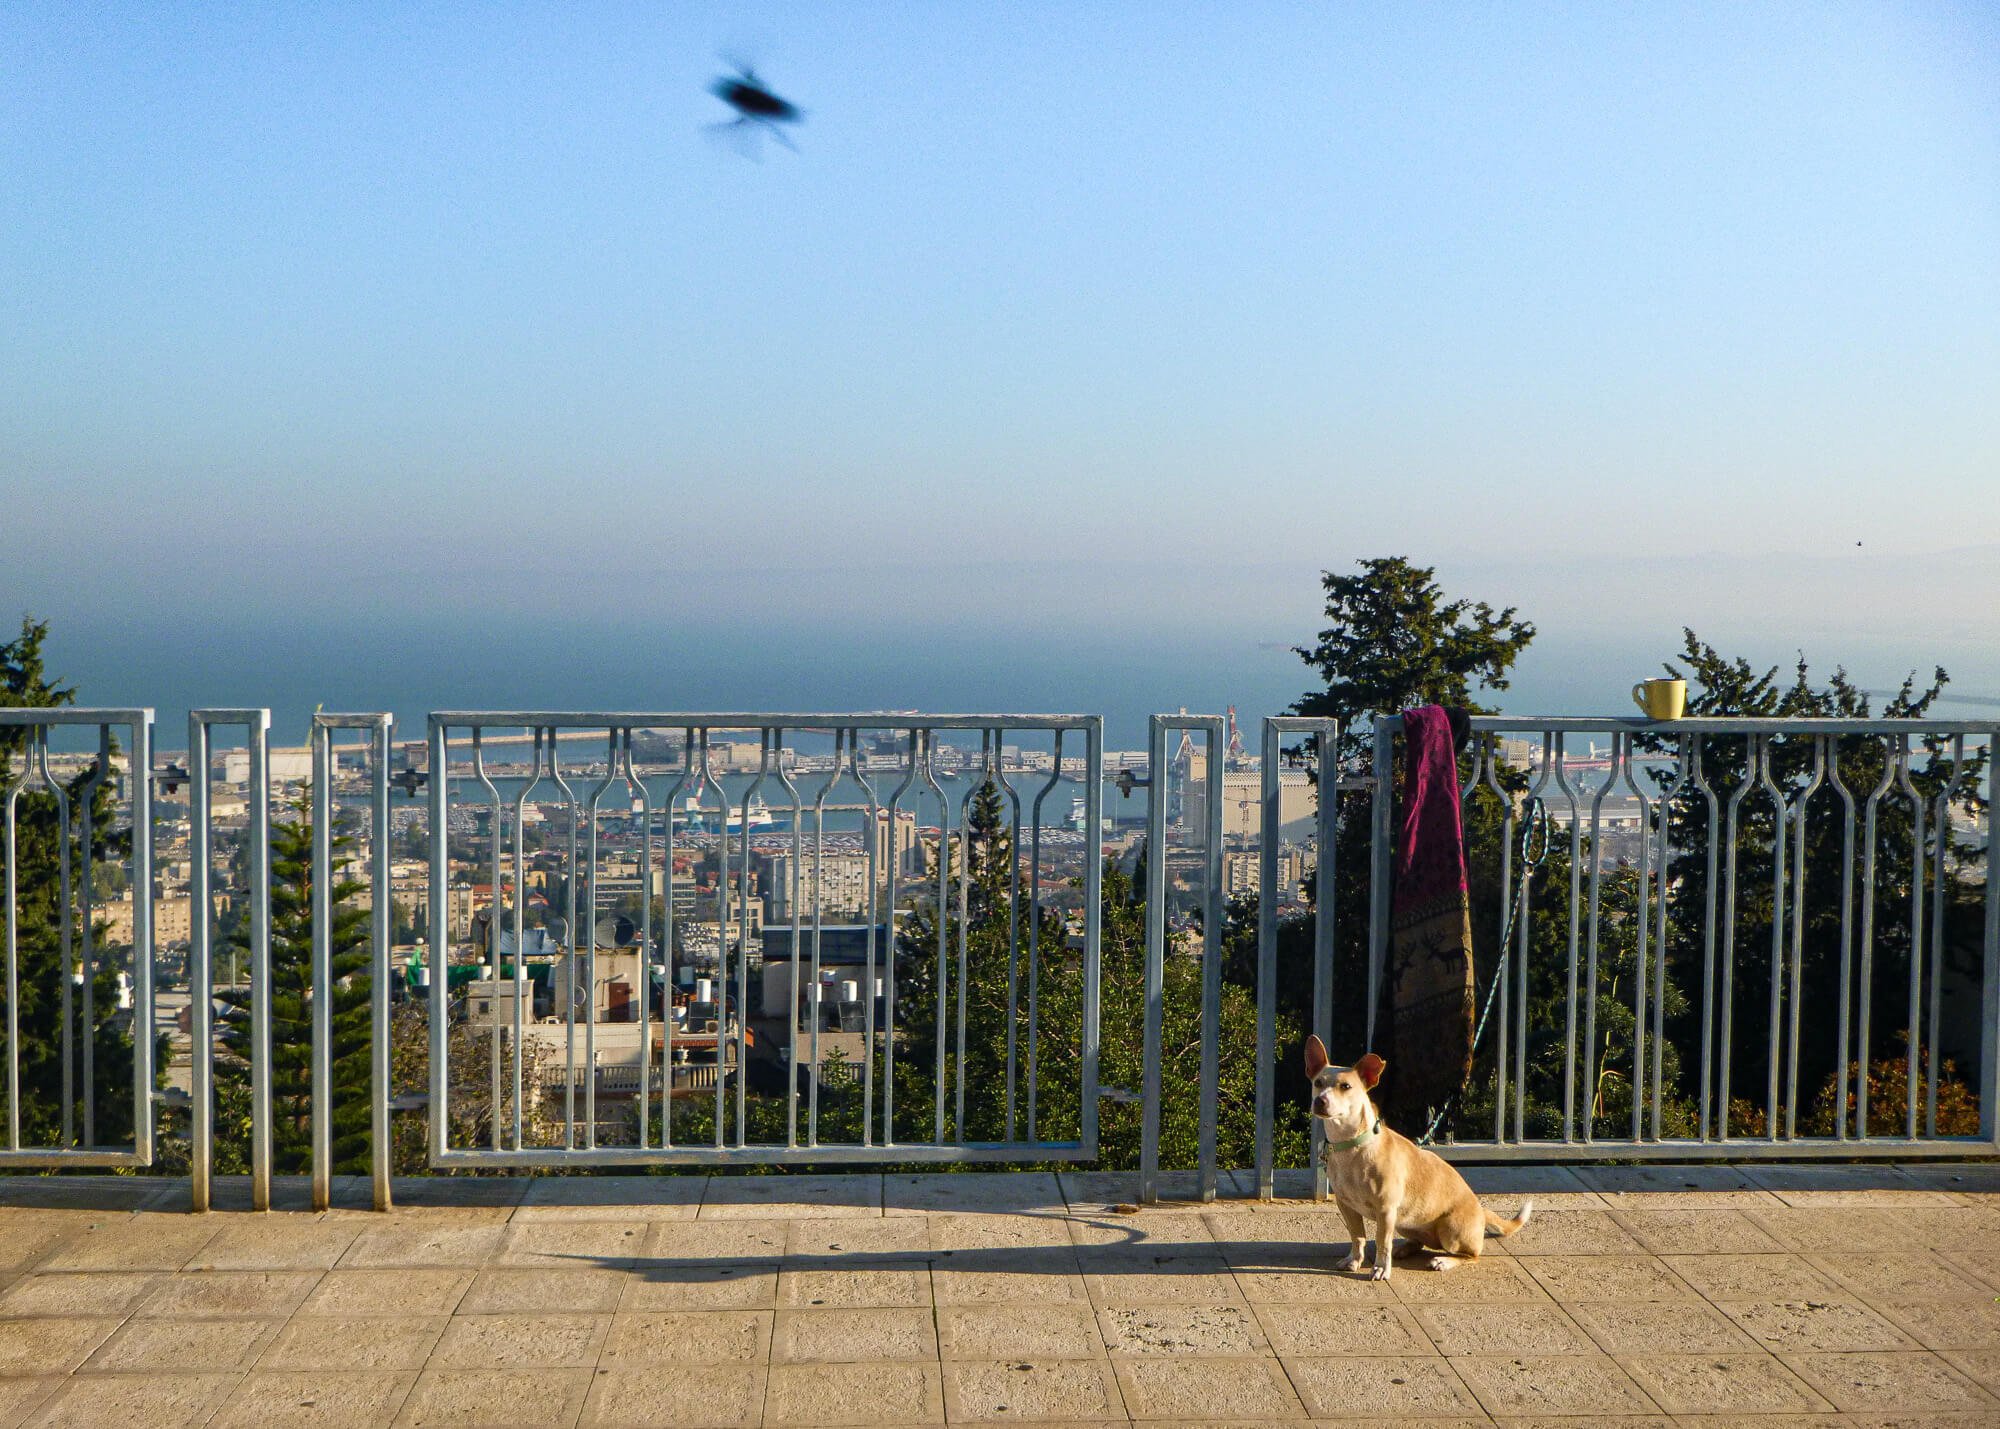 Over the Haifa port - one of my favourite destinations in Israel